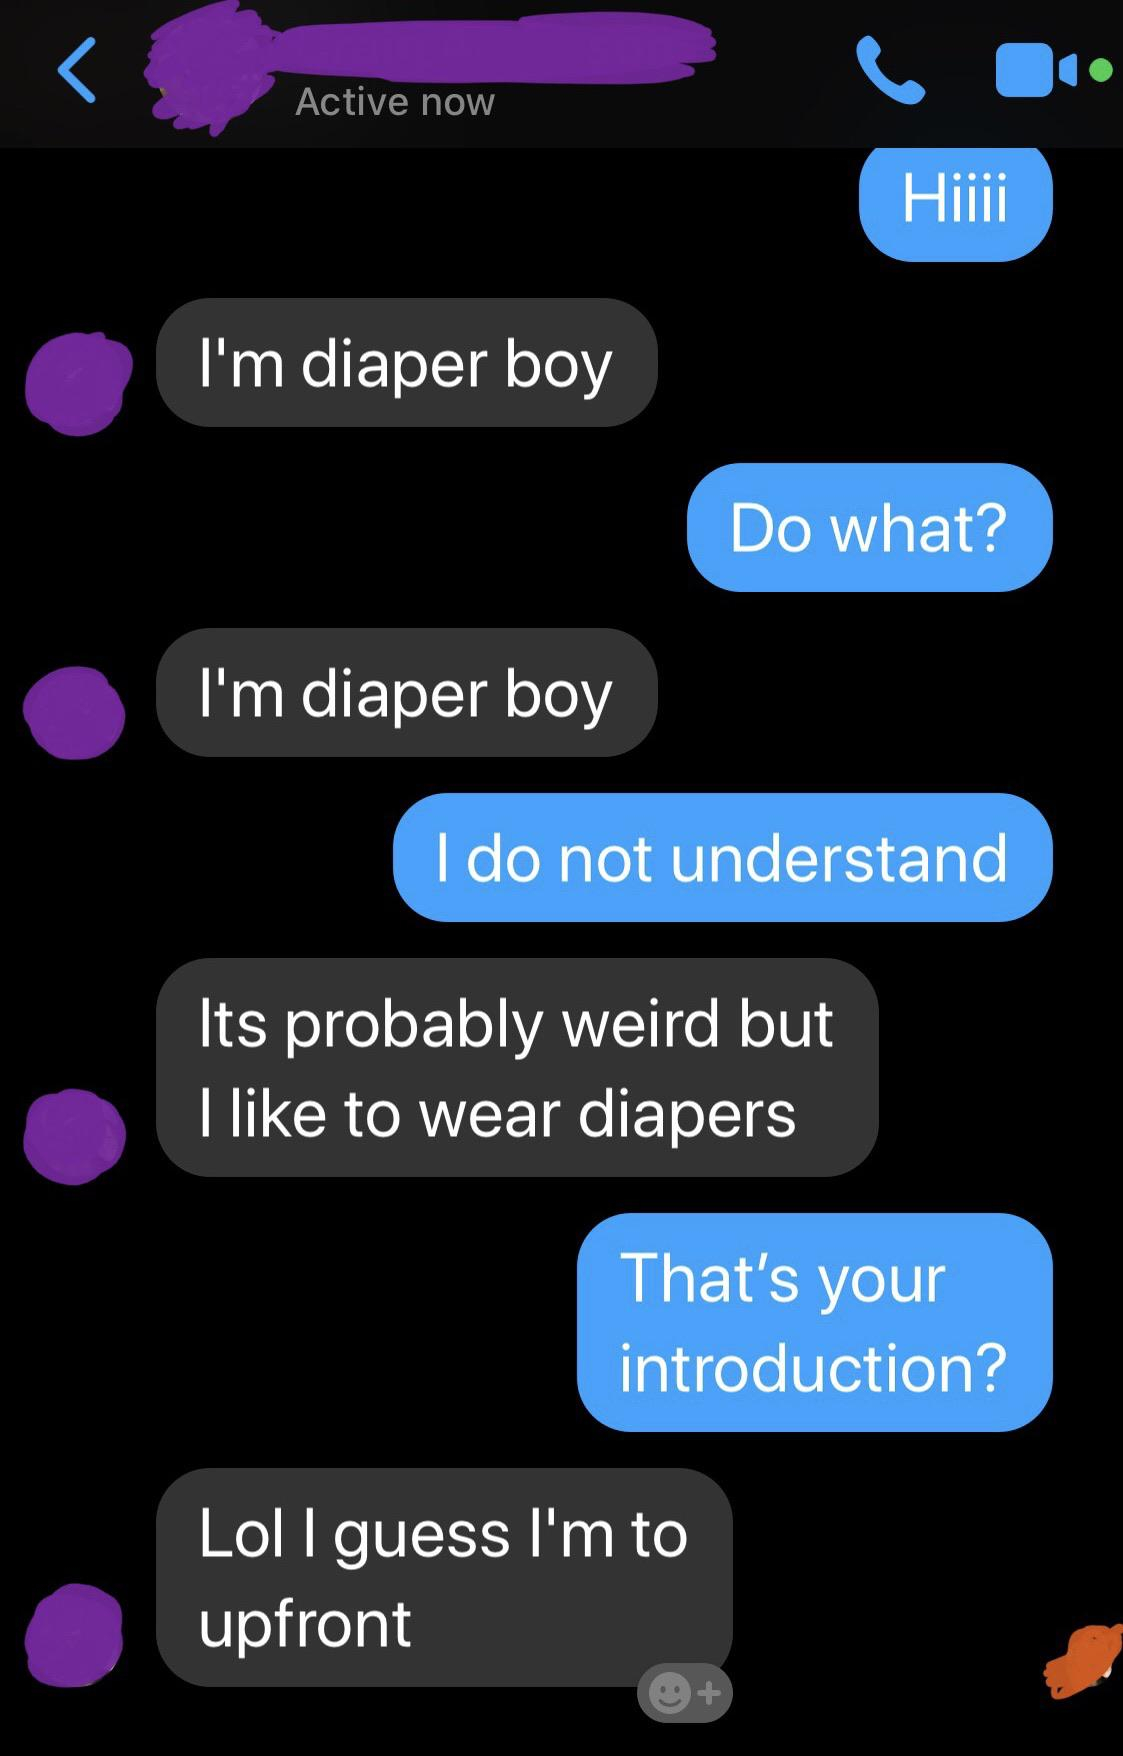 screenshot - Active now Hiiii I'm diaper boy Do what? I'm diaper boy I do not understand Its probably weird but I to wear diapers That's your introduction? Lol I guess I'm to upfront